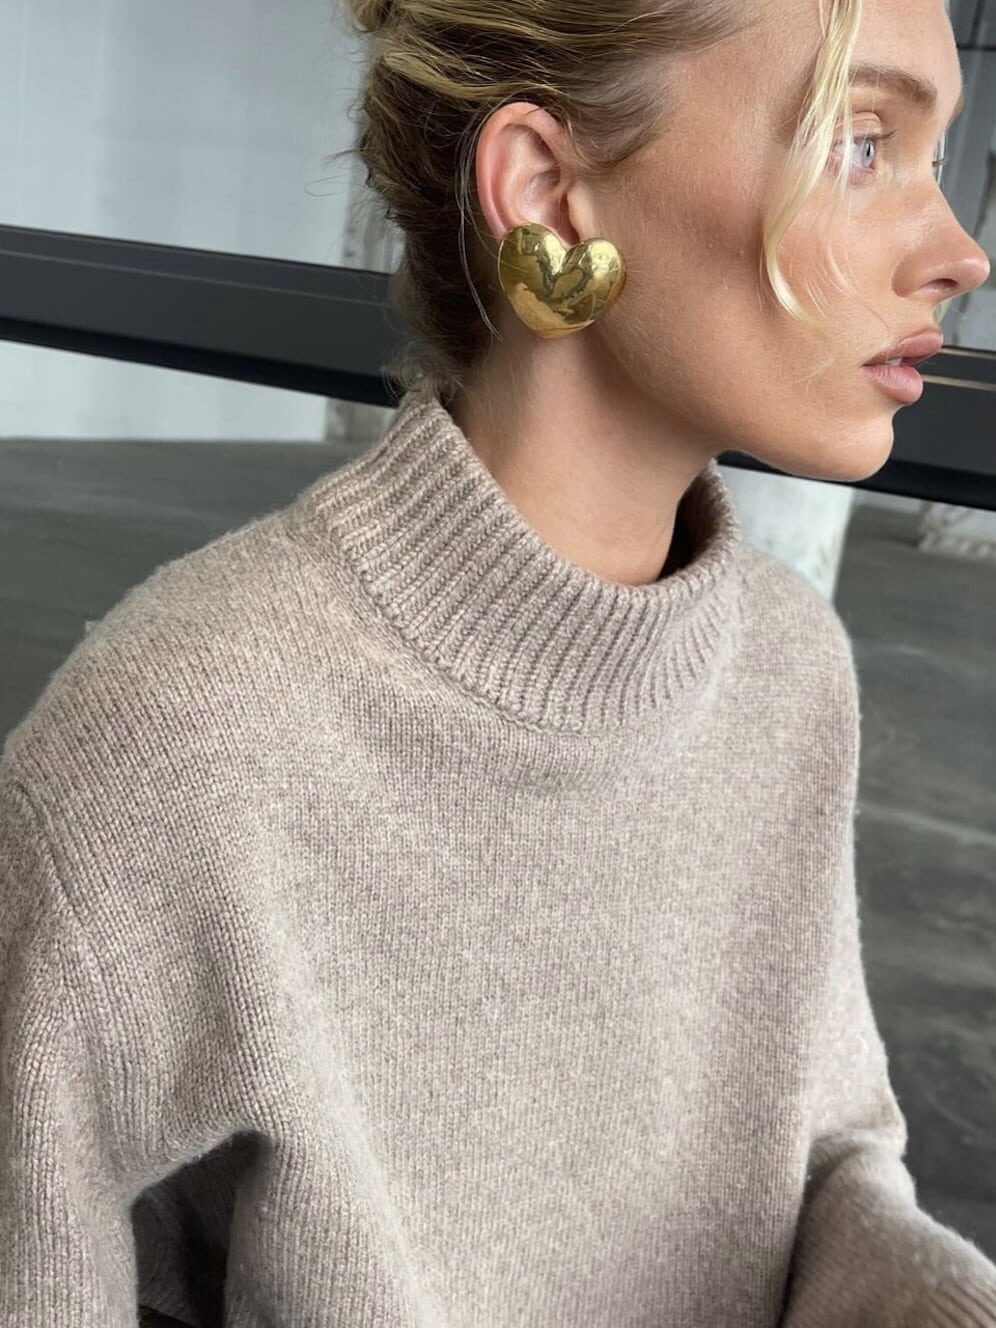 Woman wearing a chunky mock neck sweater with gold heart earrings and a fresh faced makeup look.